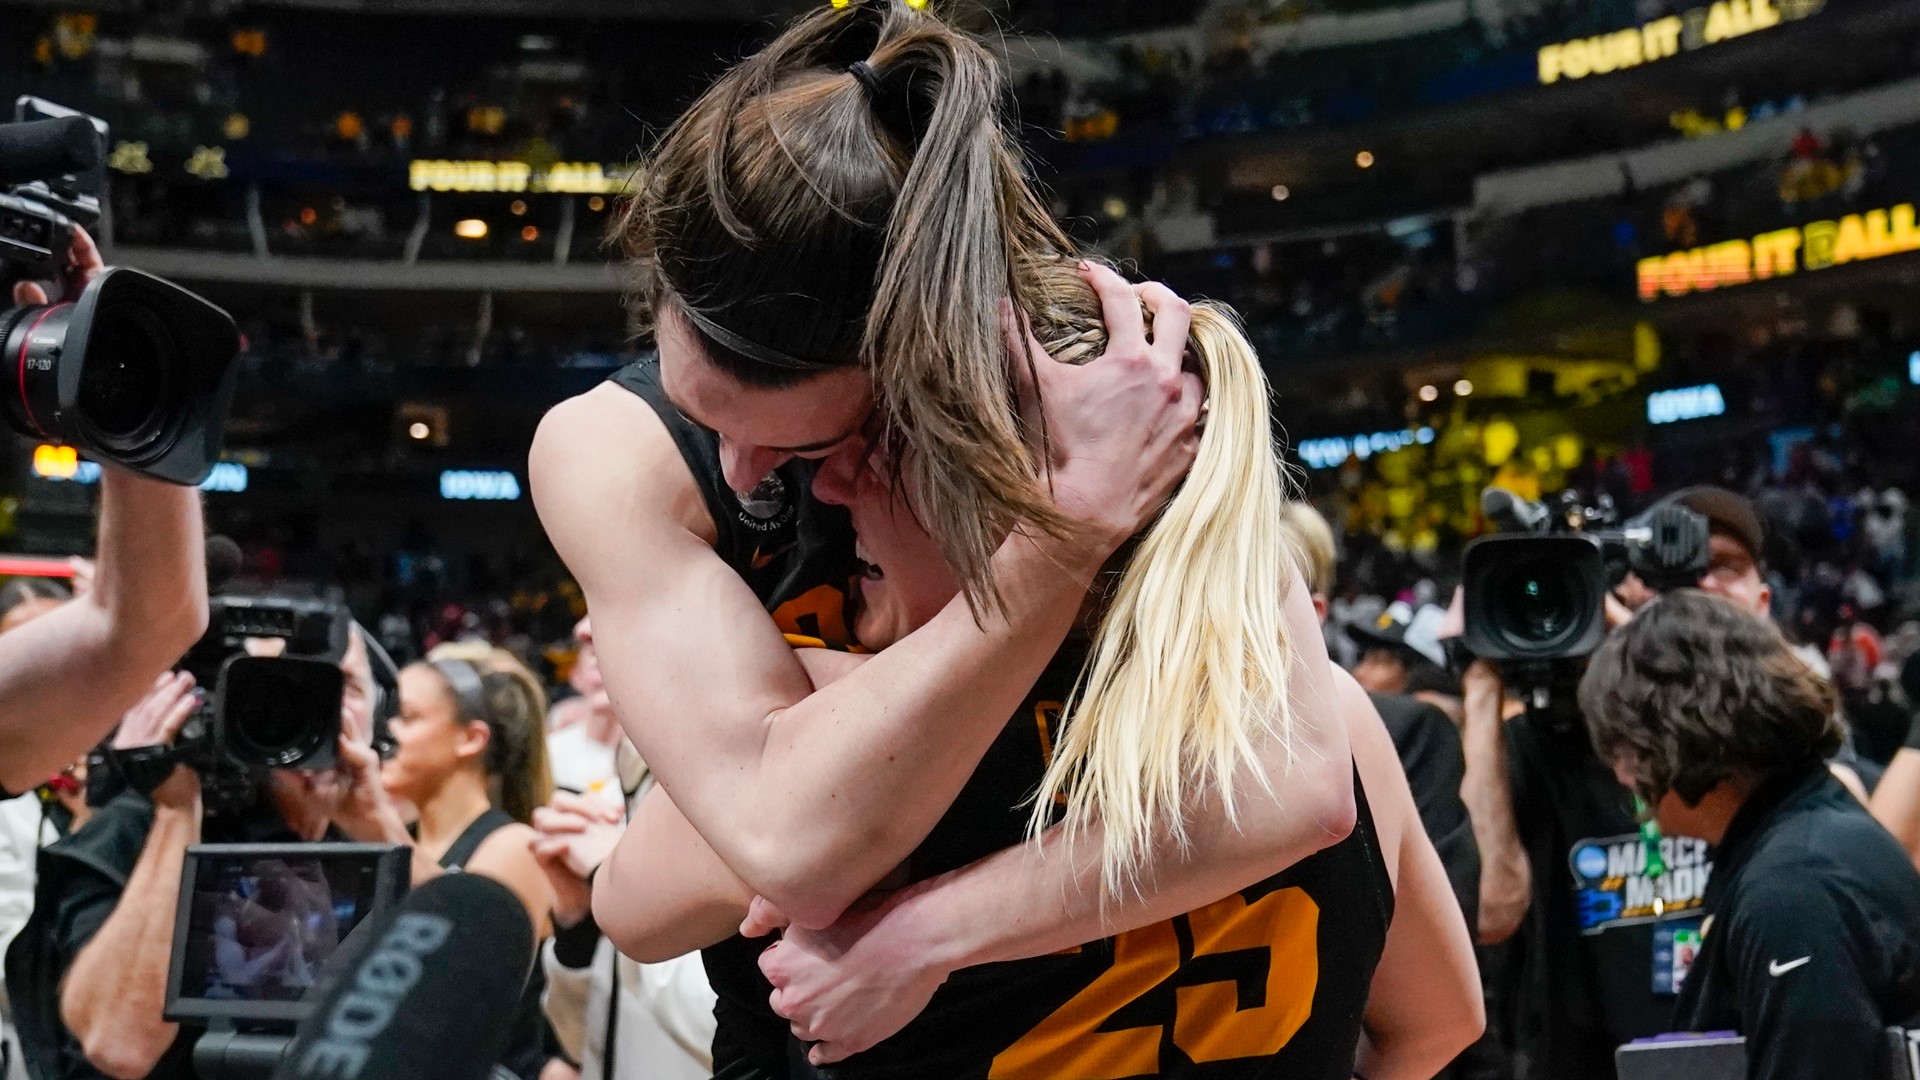 Iowa will play for its first national championship in program history after defeating South Carolina 77-73.